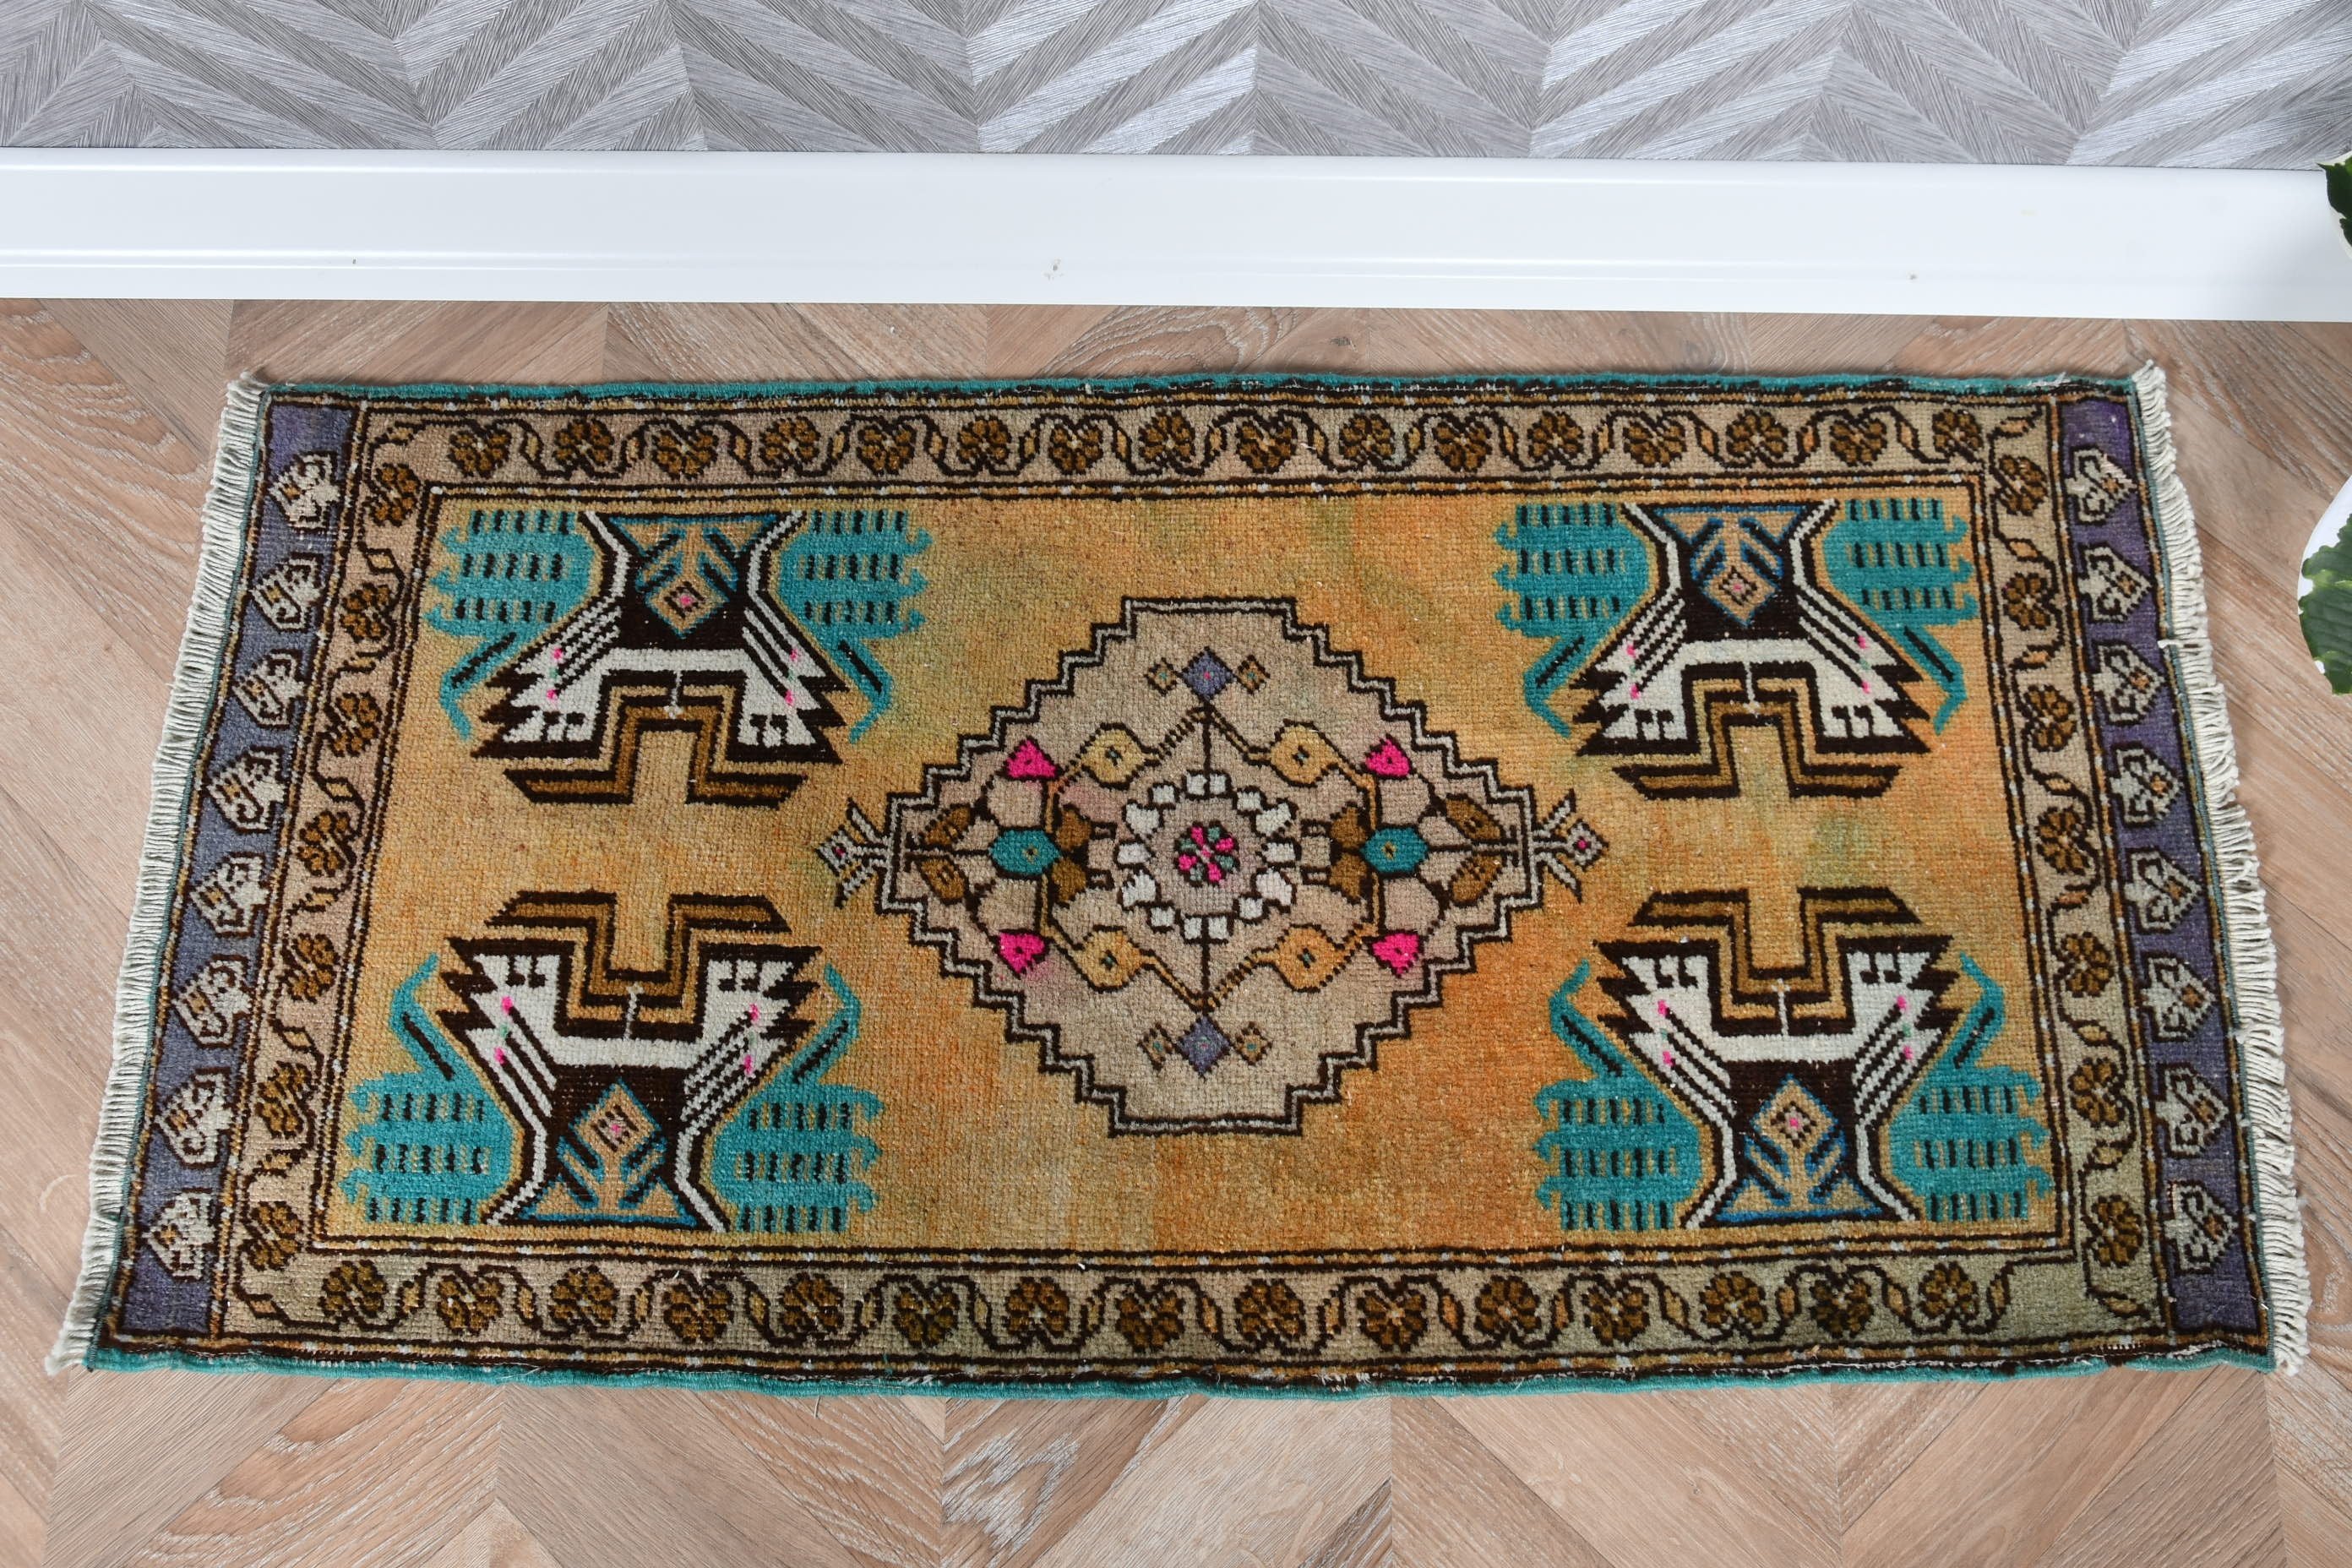 Vintage Rug, Rugs for Bath, Home Decor Rugs, 1.8x3 ft Small Rug, Turkish Rug, Wall Hanging Rug, Entry Rugs, Blue Floor Rug